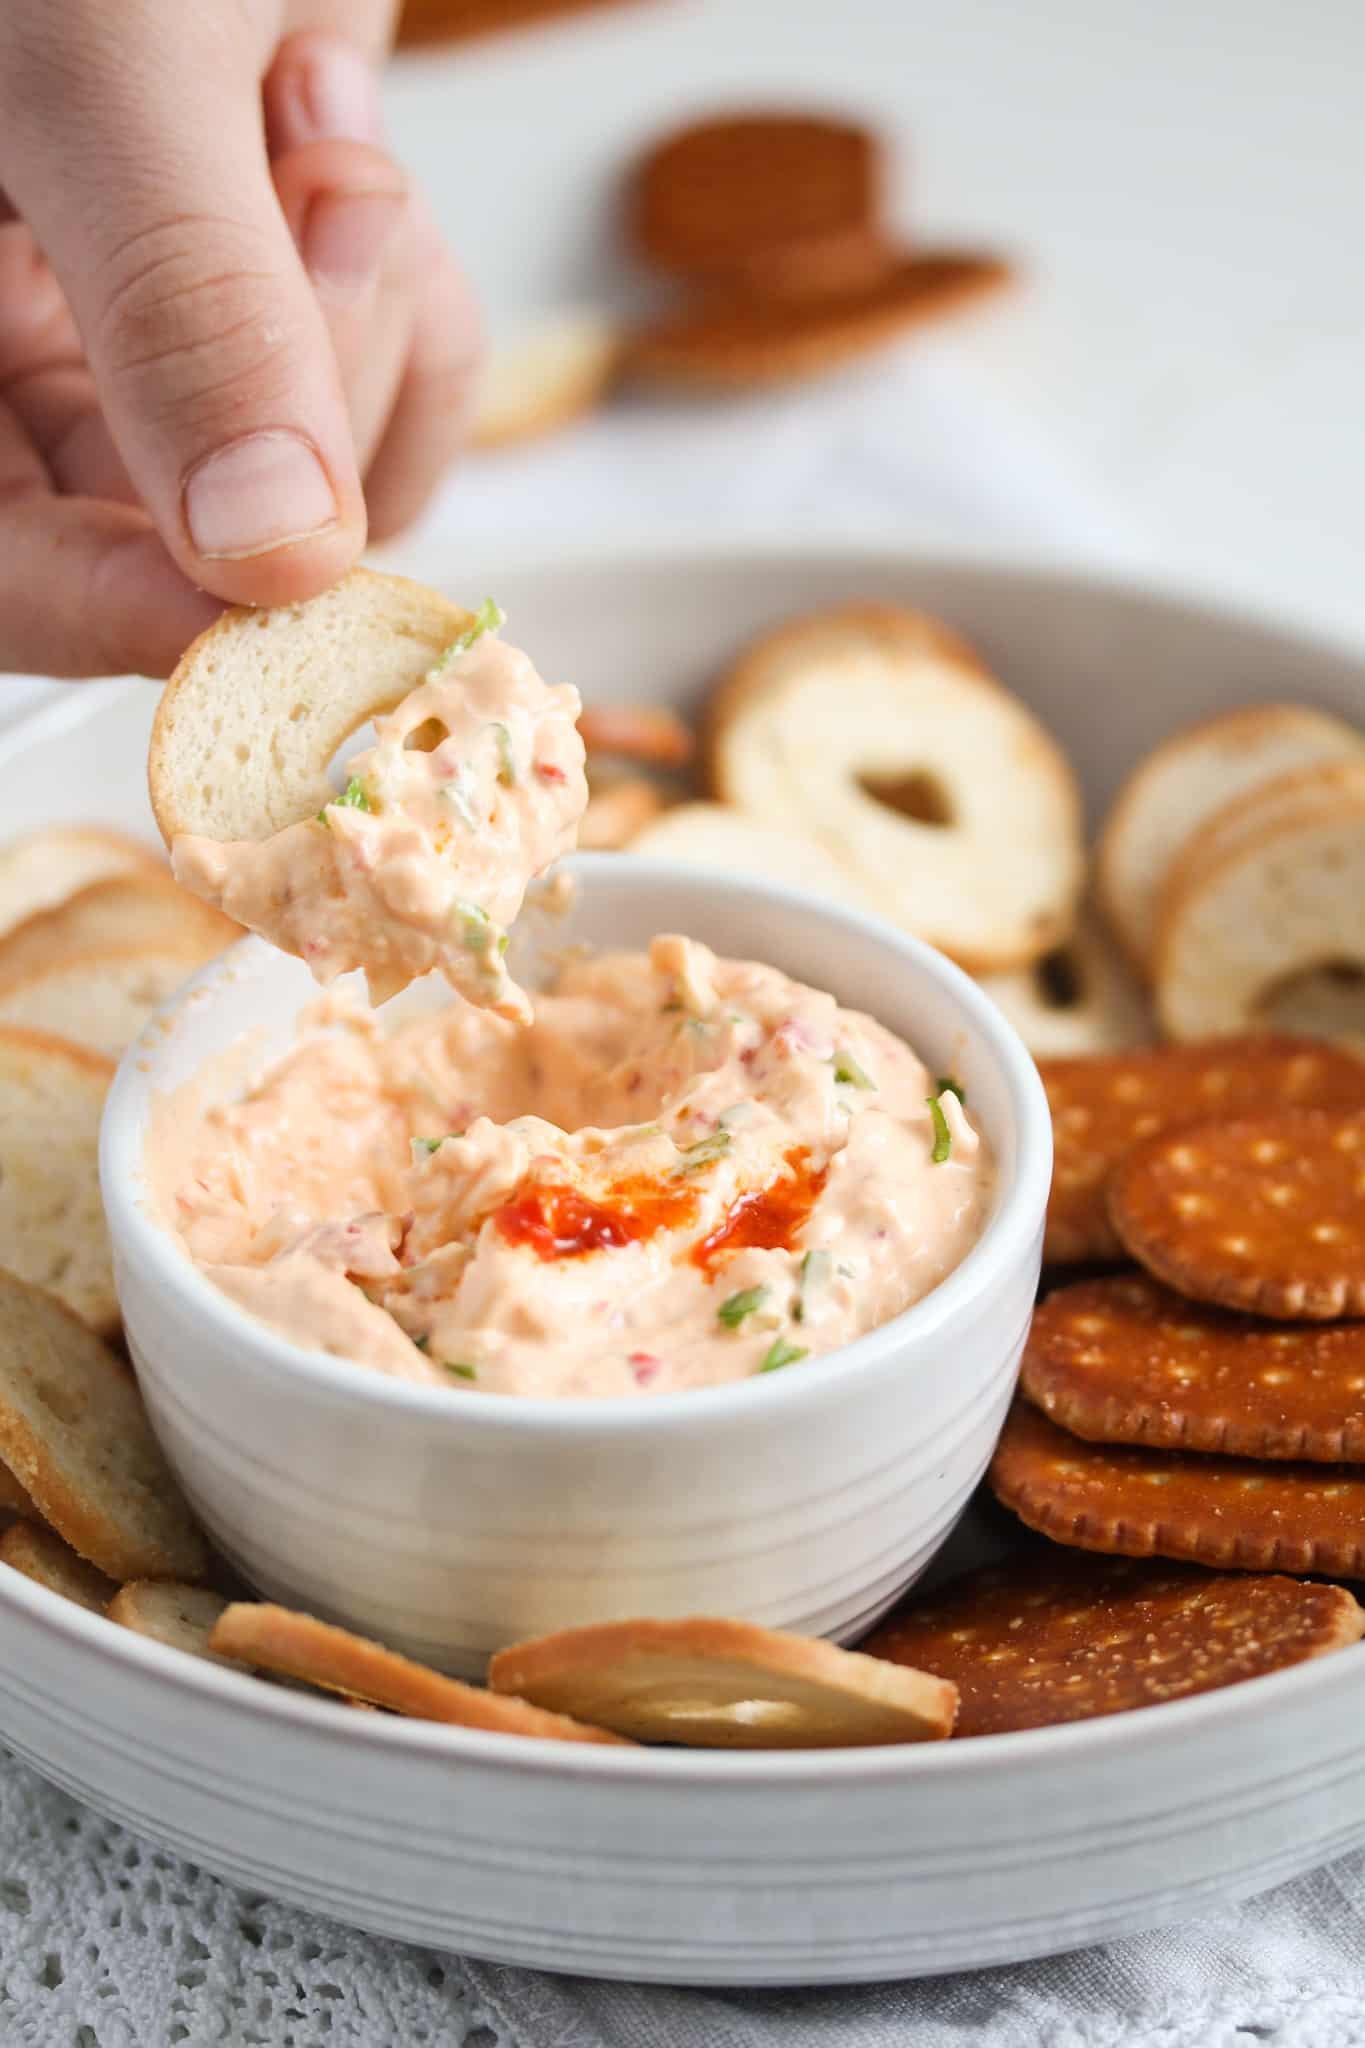 peri peri dip in a small bowl and a hand dipping a cracker in it.